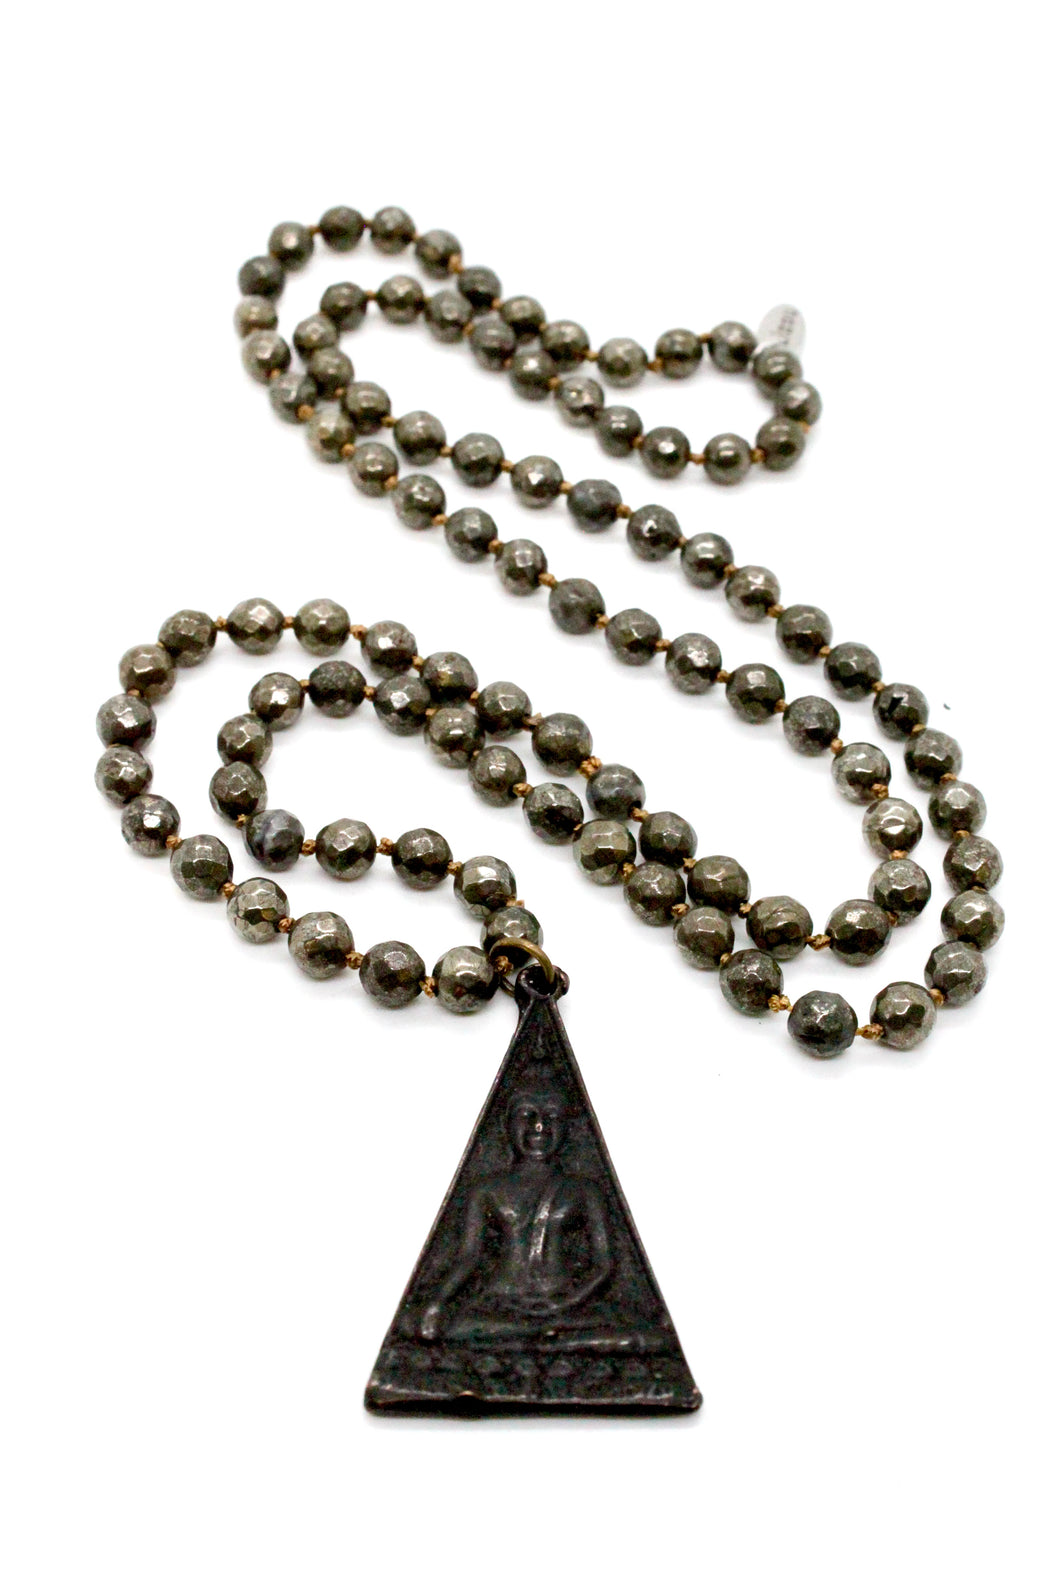 Buddha Necklace 130 One of a Kind -The Buddha Collection-